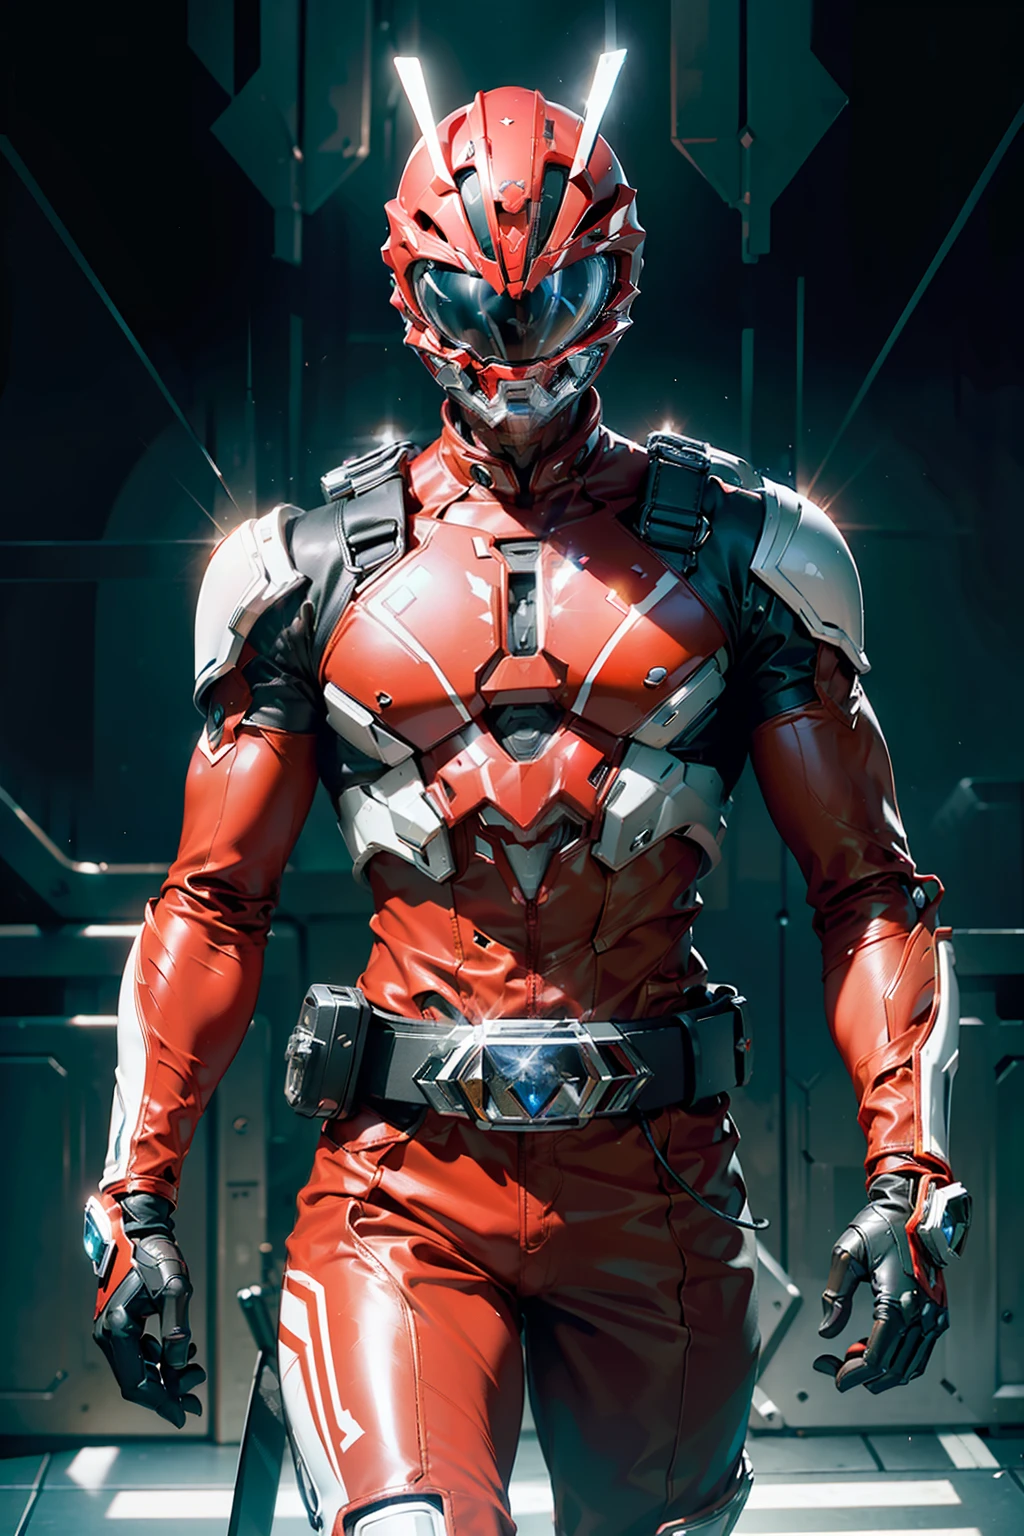 ((power ranger)), One guy、 Red costume, Solo, ((slim figure)), (Anatomically correct), Cowboy Shot, Masked face, (Complex cybersuit of red color), (Intricately designed hero suit), Suits with complex lines, Thin cybersuit with a tight body, long leather gloves up to the white elbows,,,,, Arm cover made of hard material, White Leather Boots, Wearing a full-face helmet, (White belt), (Large metal buckle), (full body suits), (Full face helmet with no exposed face), Crystal embedded in helmet, (Very shiny cybersuit), Cyber suit made of silk, A cybersuit that adheres to the body